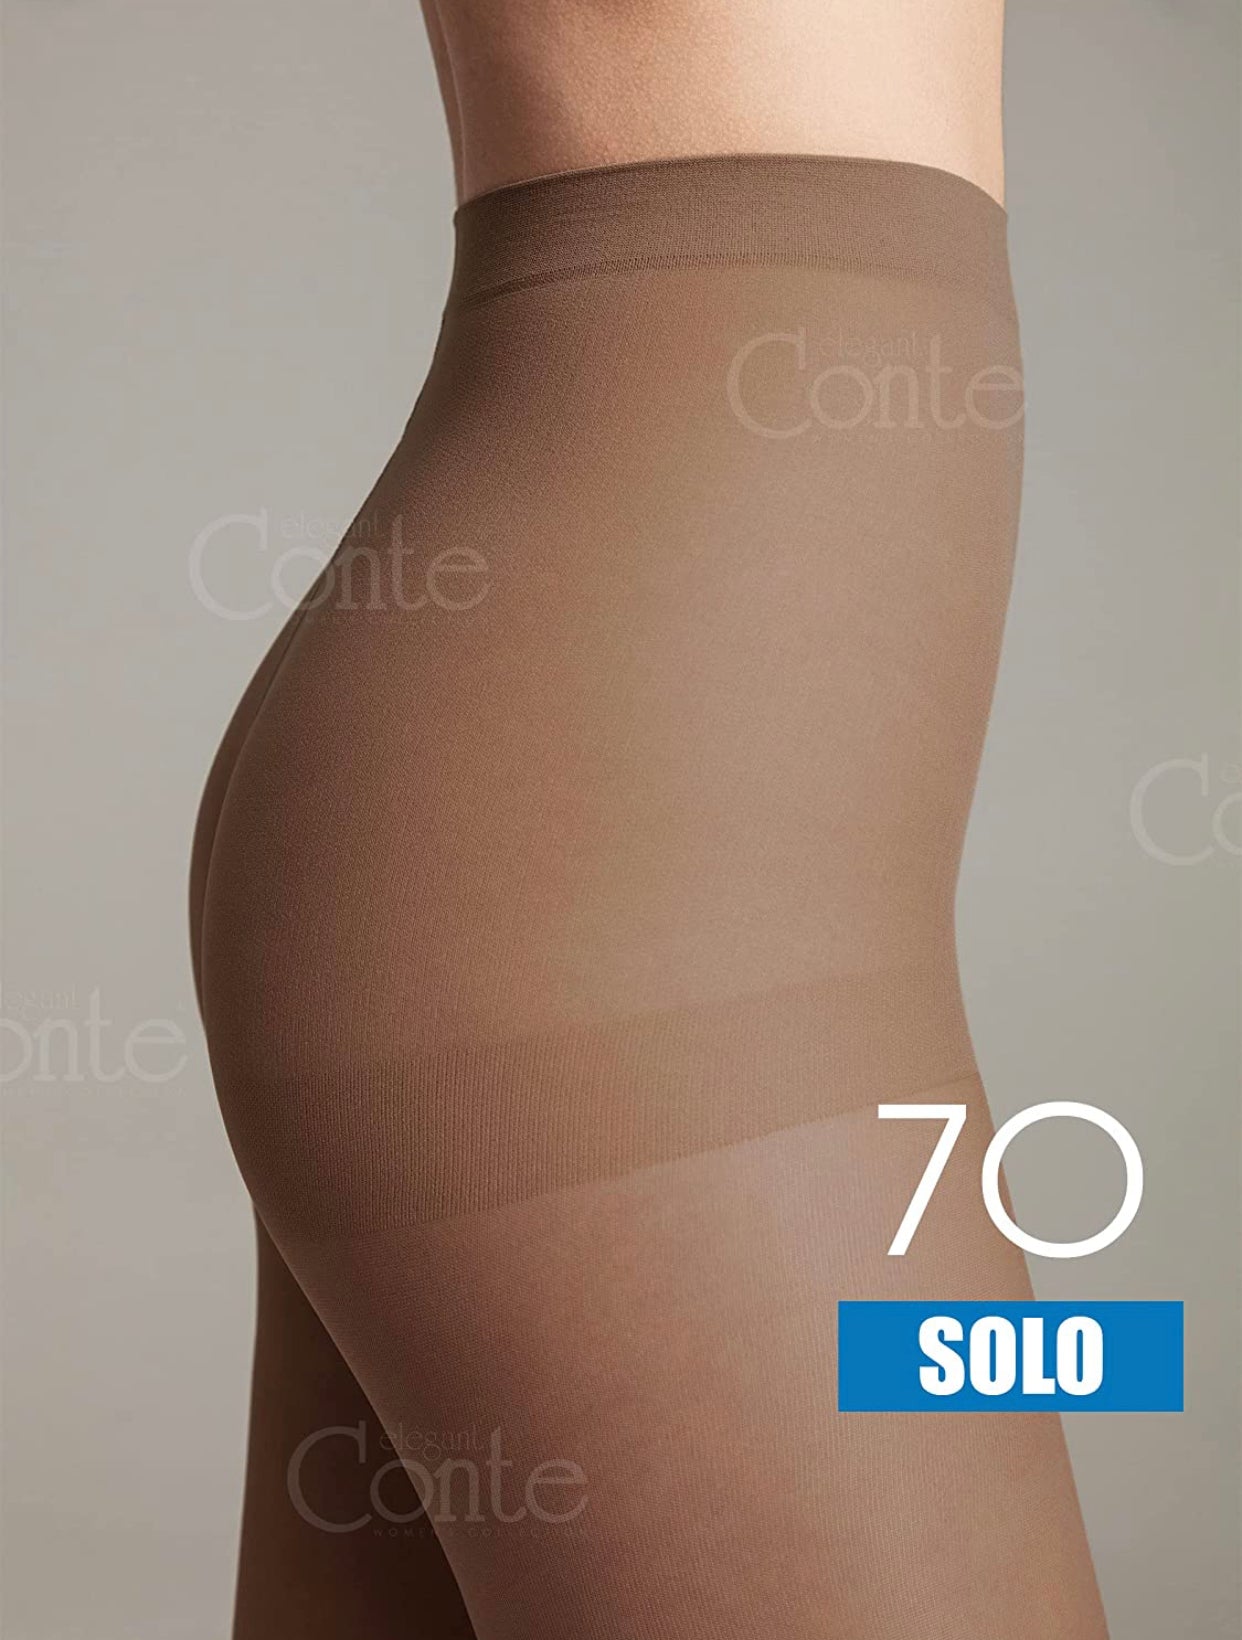 Conte Solo 70 Den - Classic Women's Tights With a Reinforced